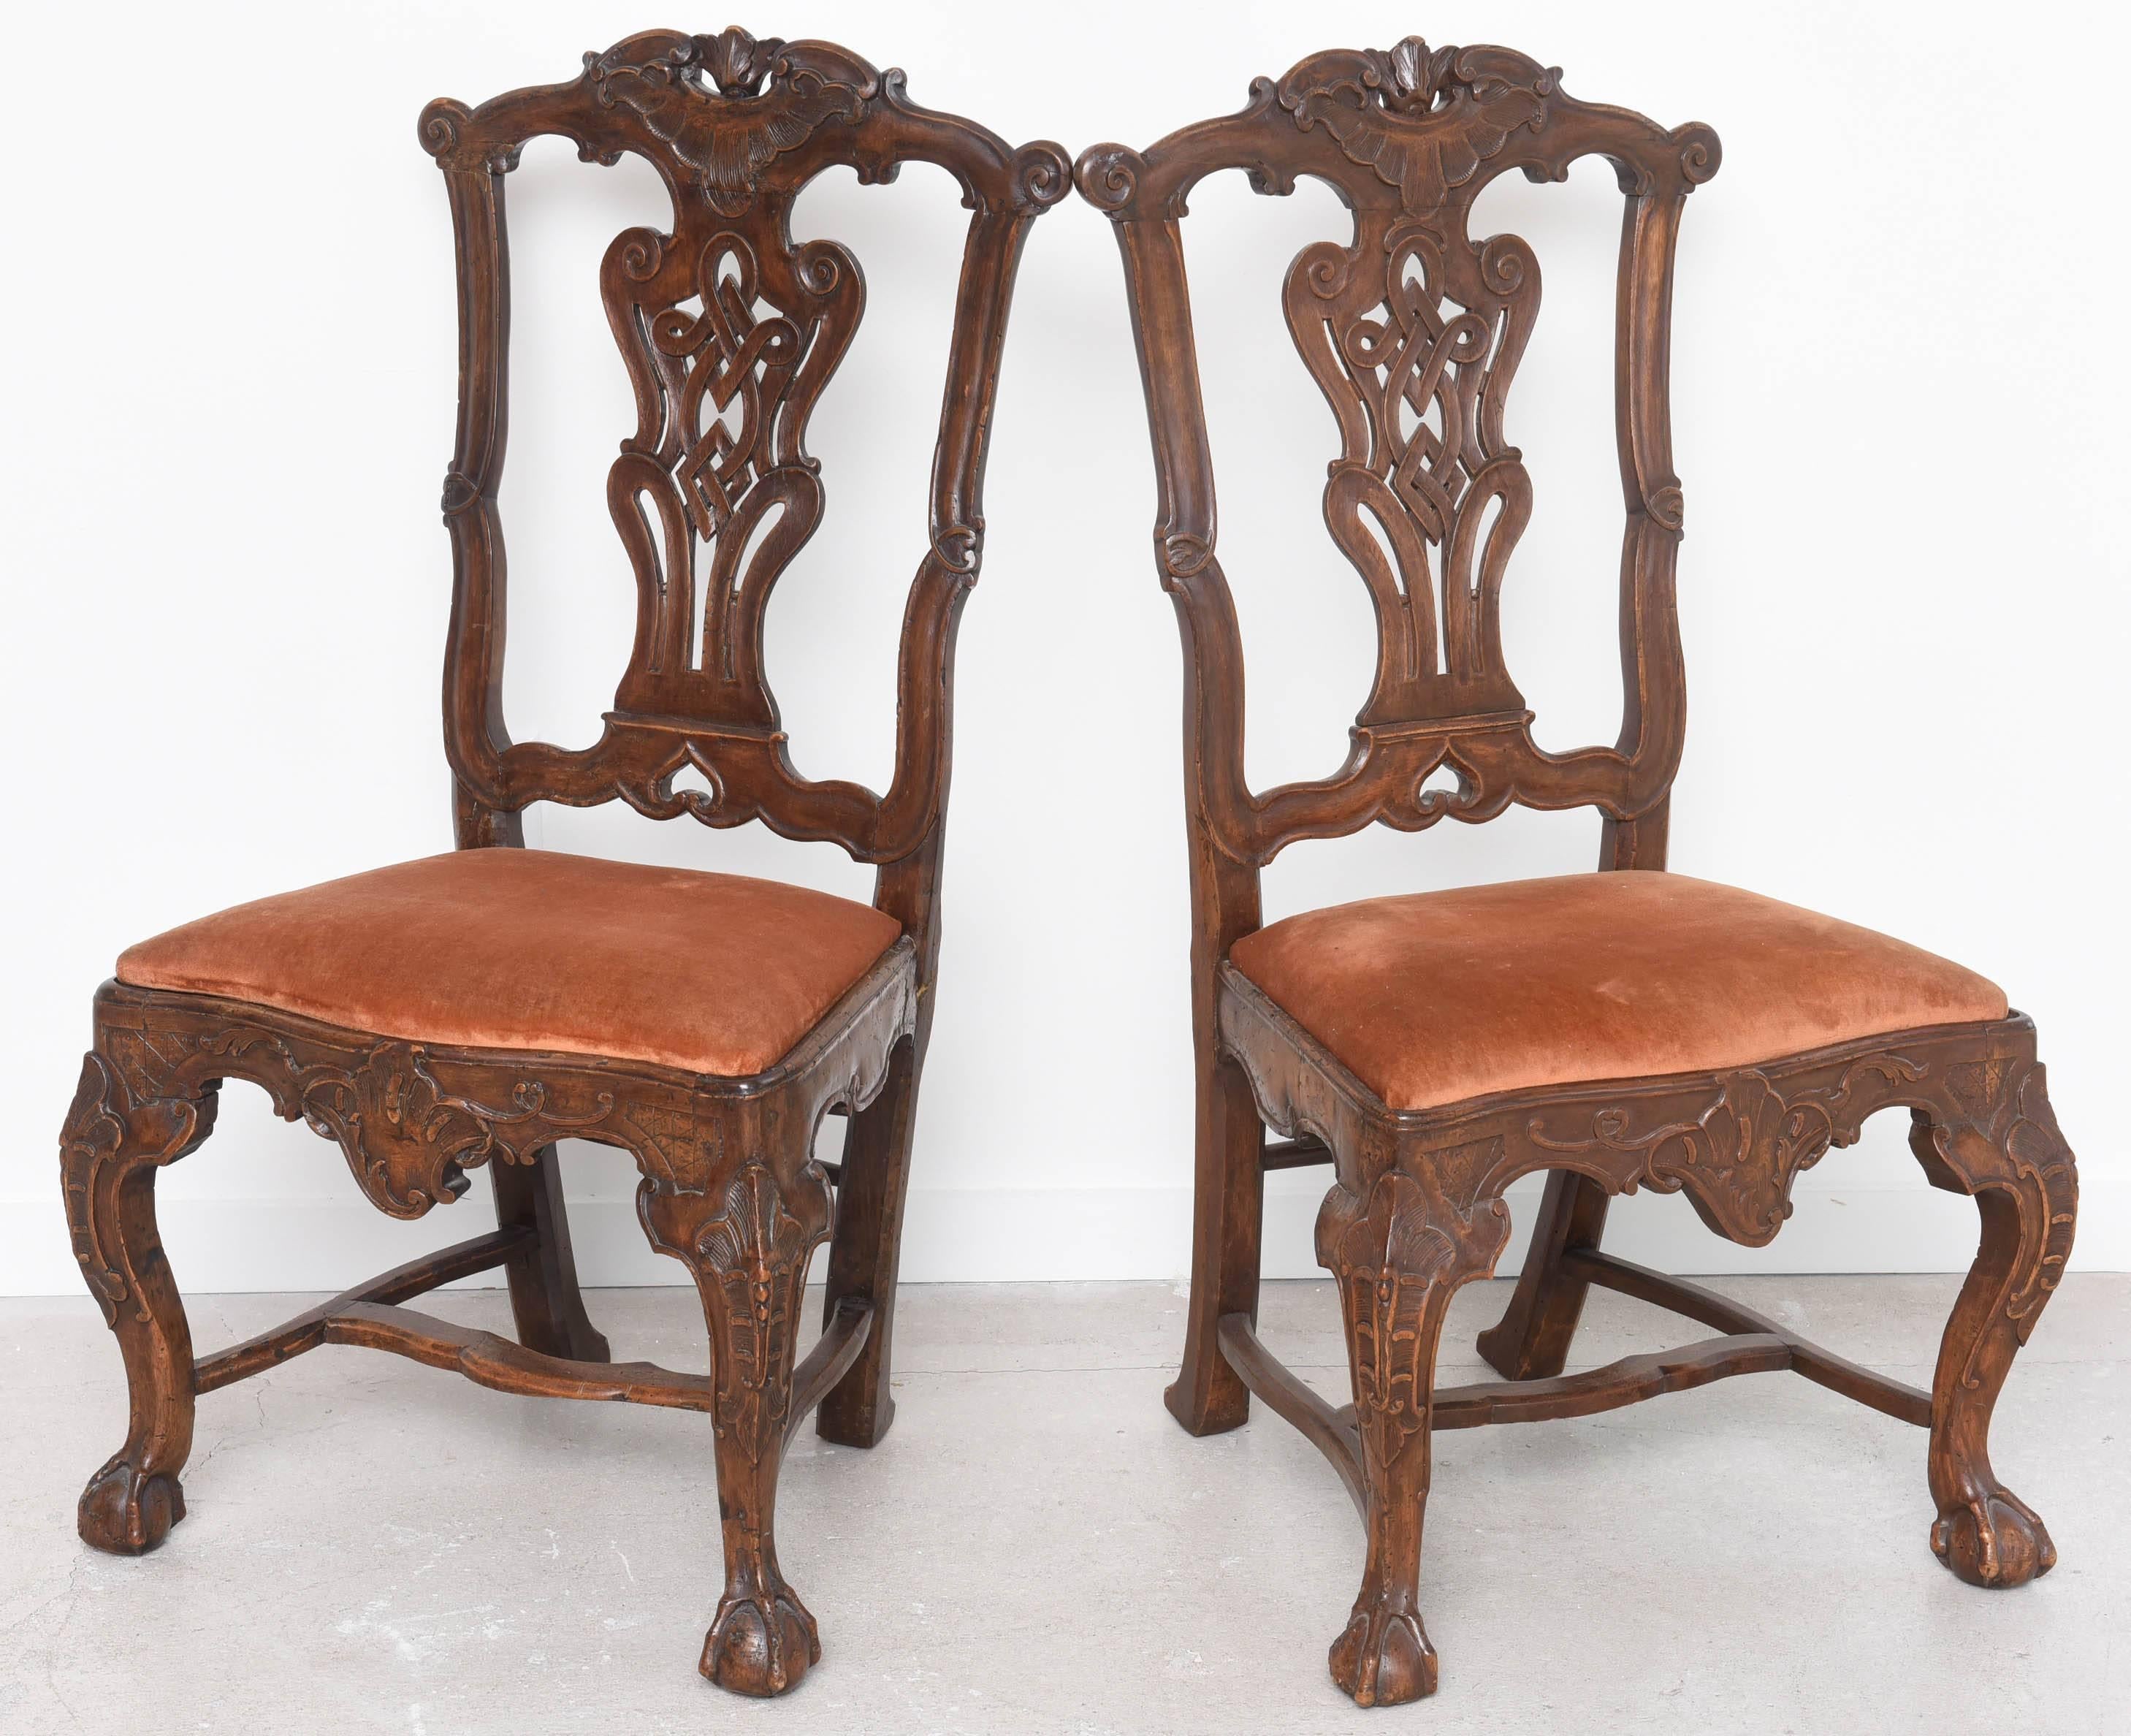 Late 18th Century Set of 18th Century Dutch Dining Chairs